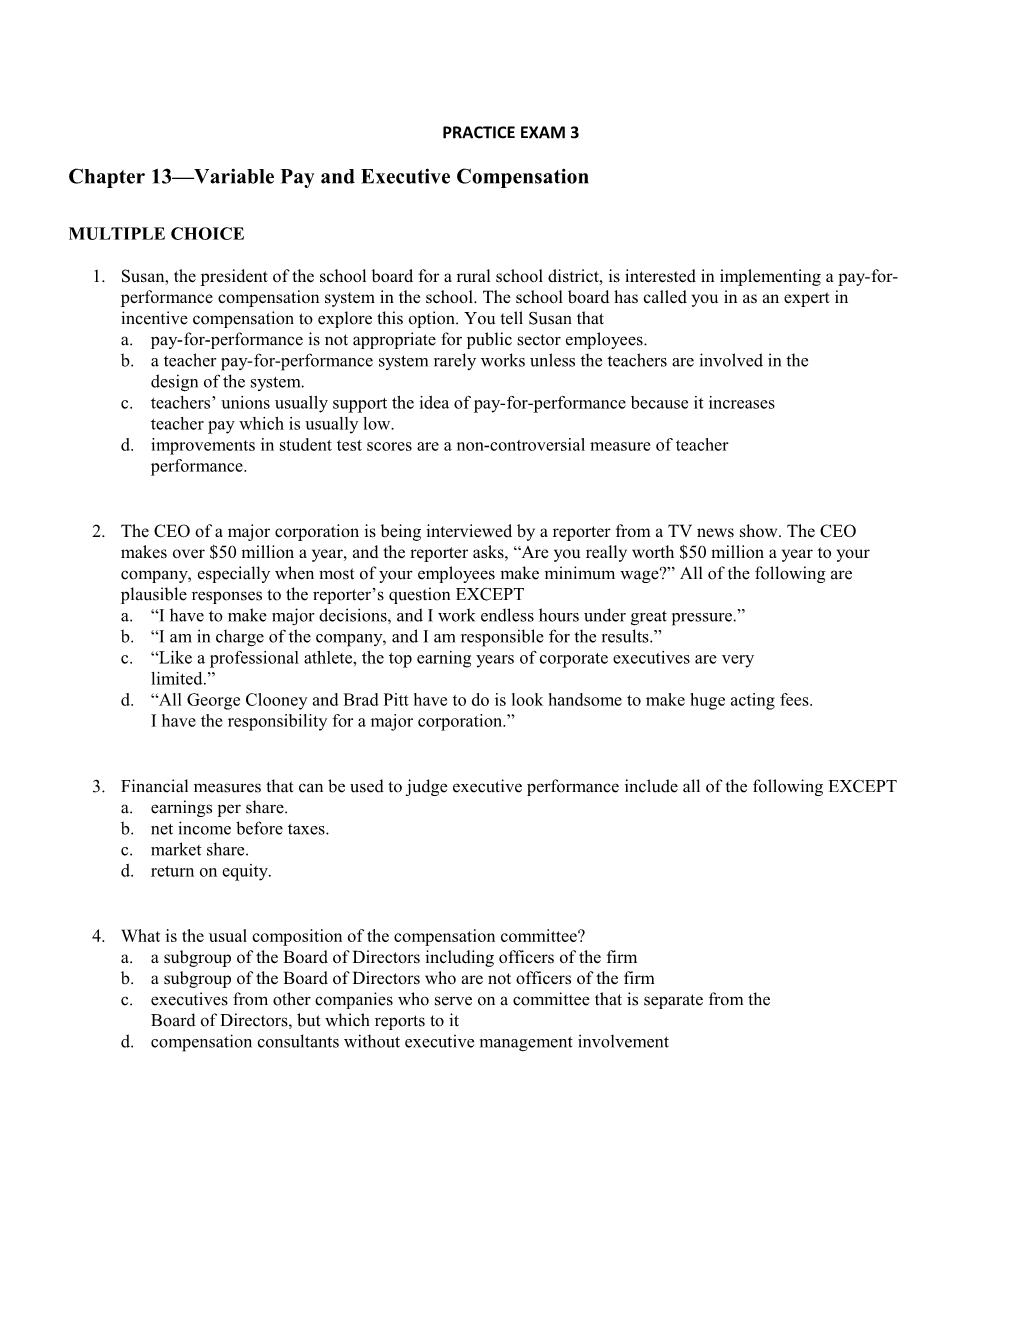 Chapter 13 Variable Pay and Executive Compensation